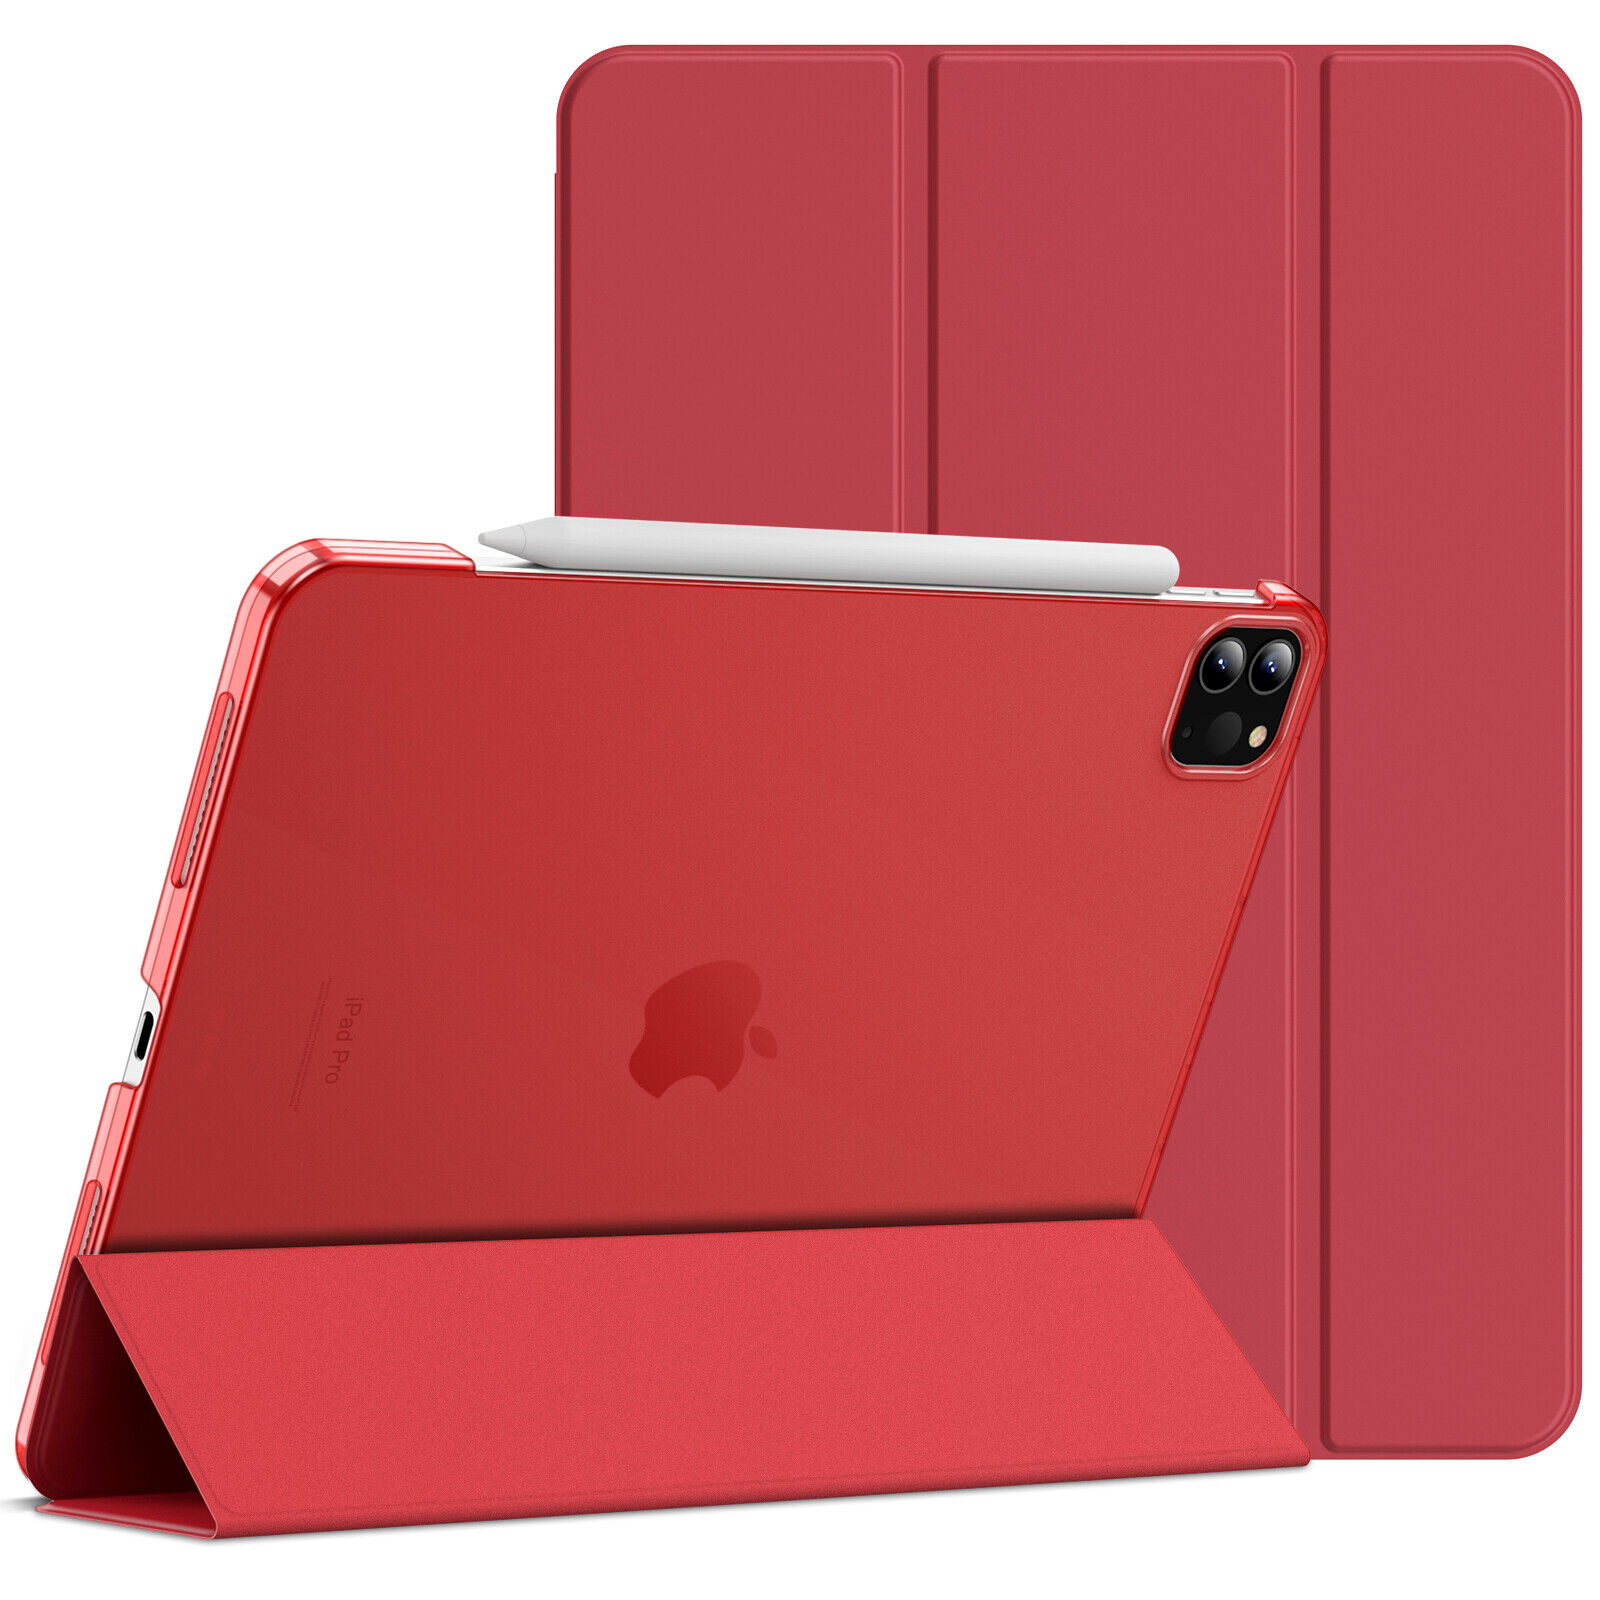 JETech Case for iPad Pro 11-Inch 2022/2021/2020 Model Cover with Auto Wake/Sleep